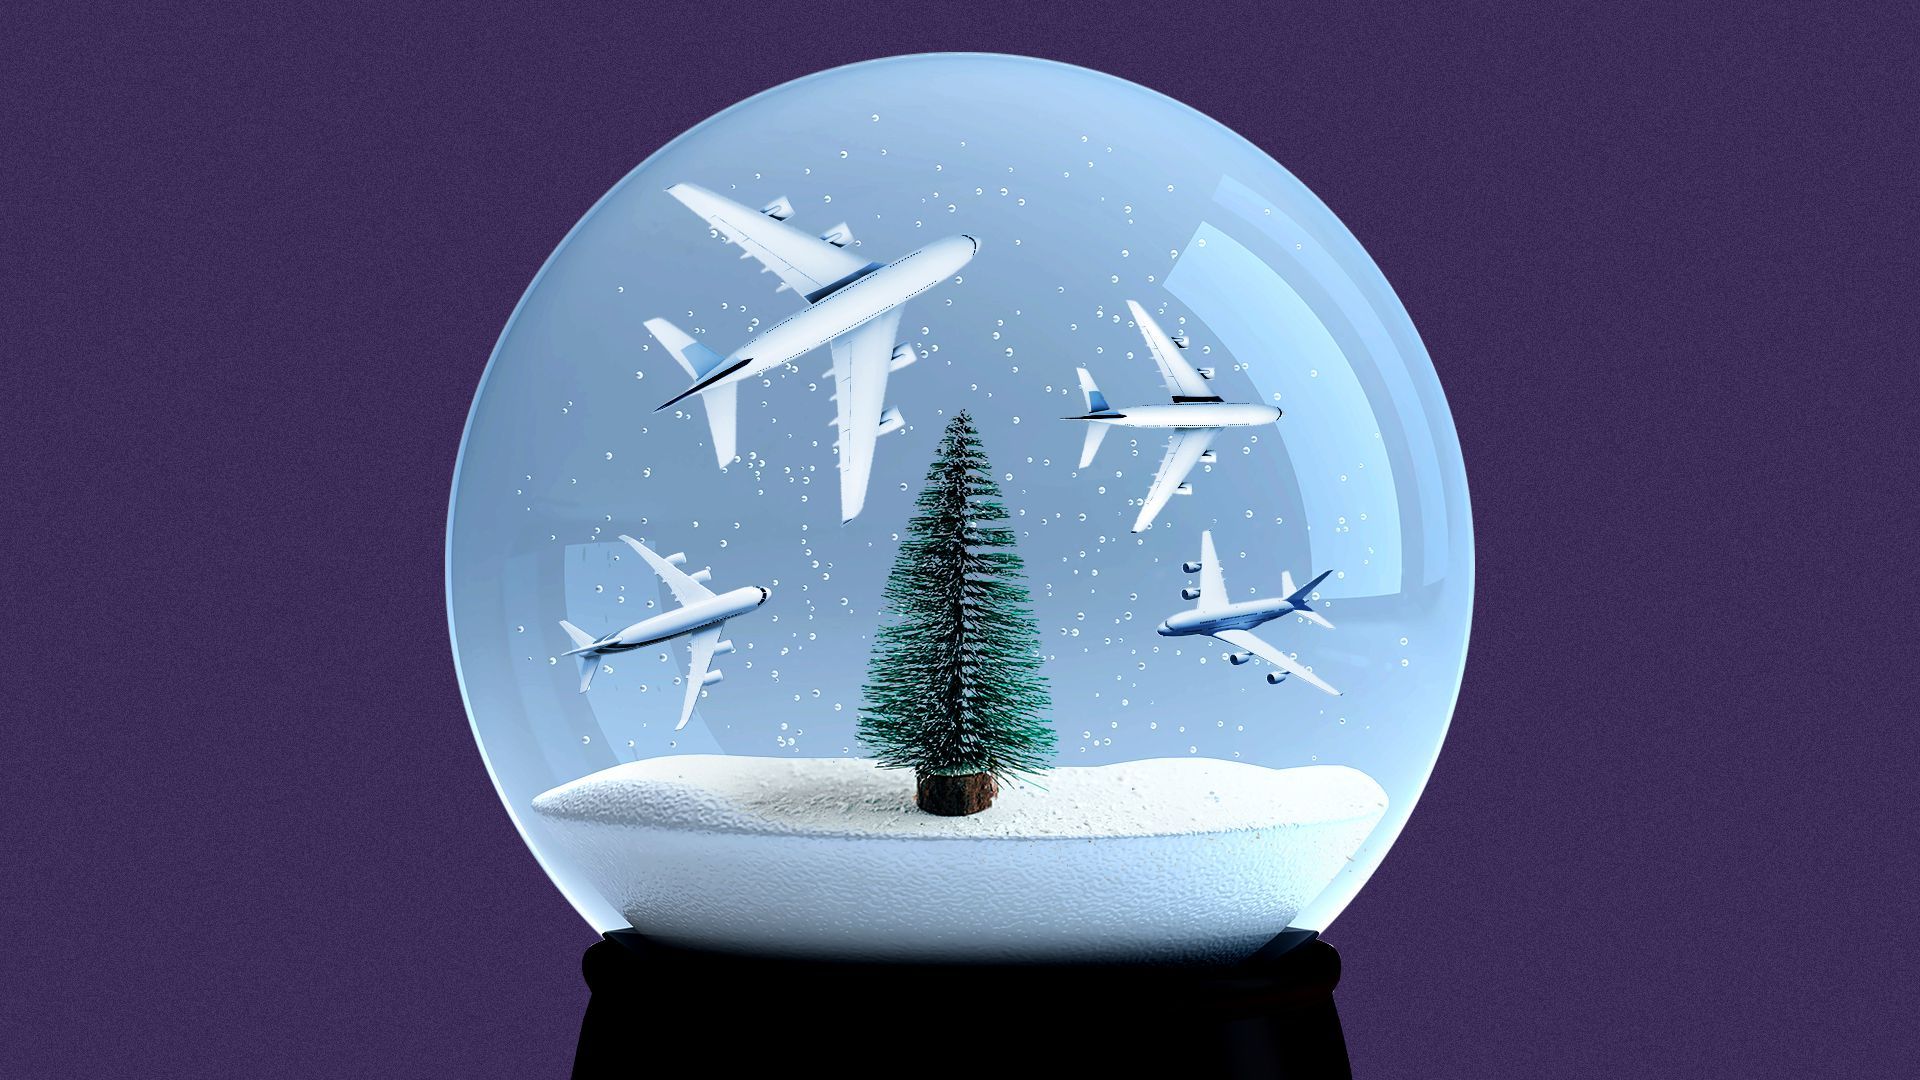 Illustration of a snow globe with a tree surrounded by numerous, small planes in flight